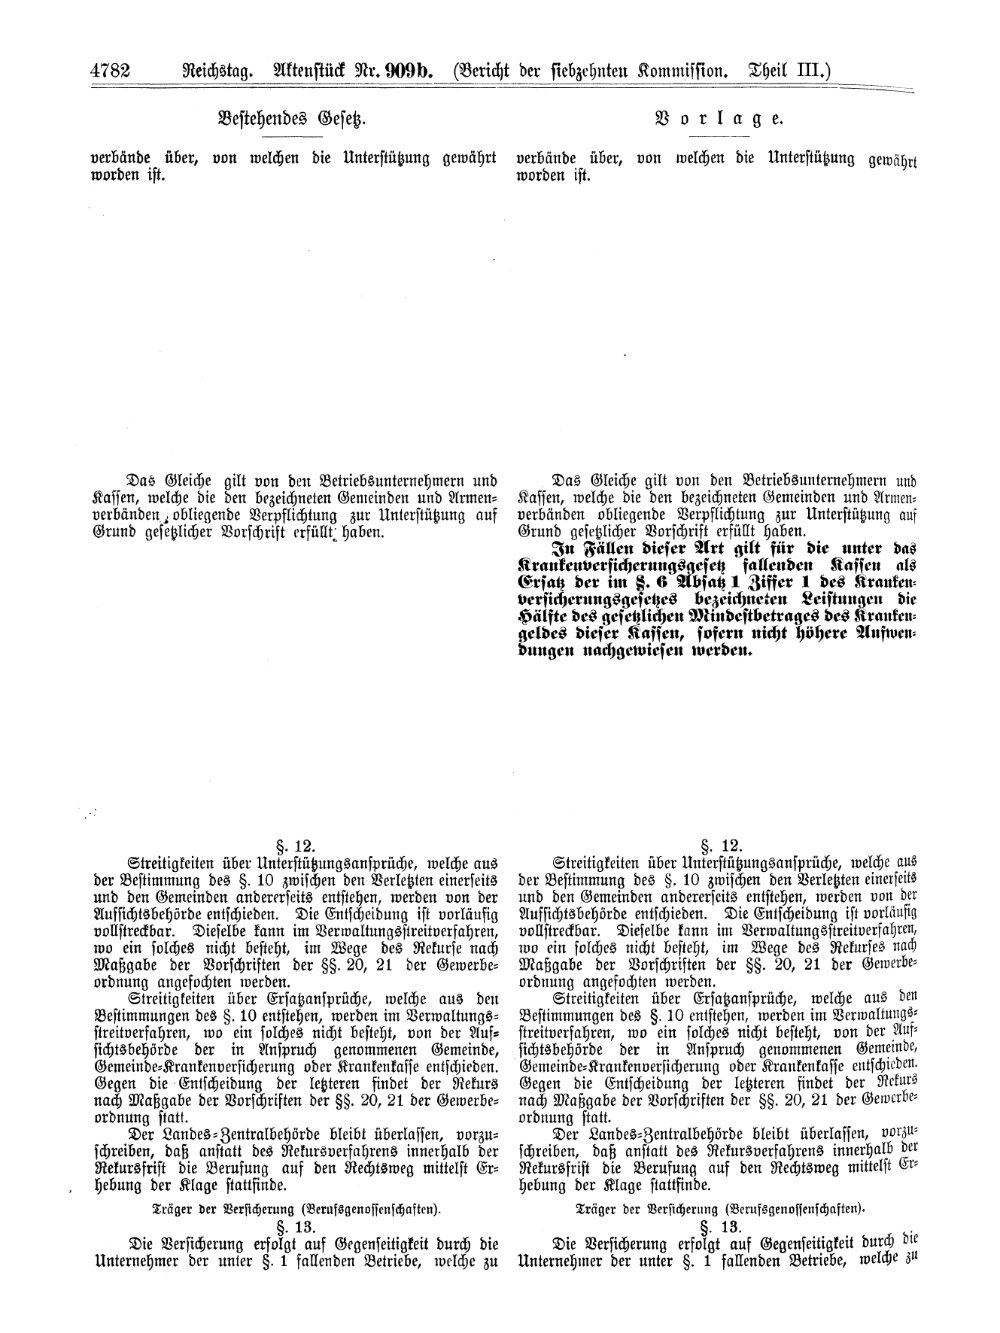 Scan of page 4782